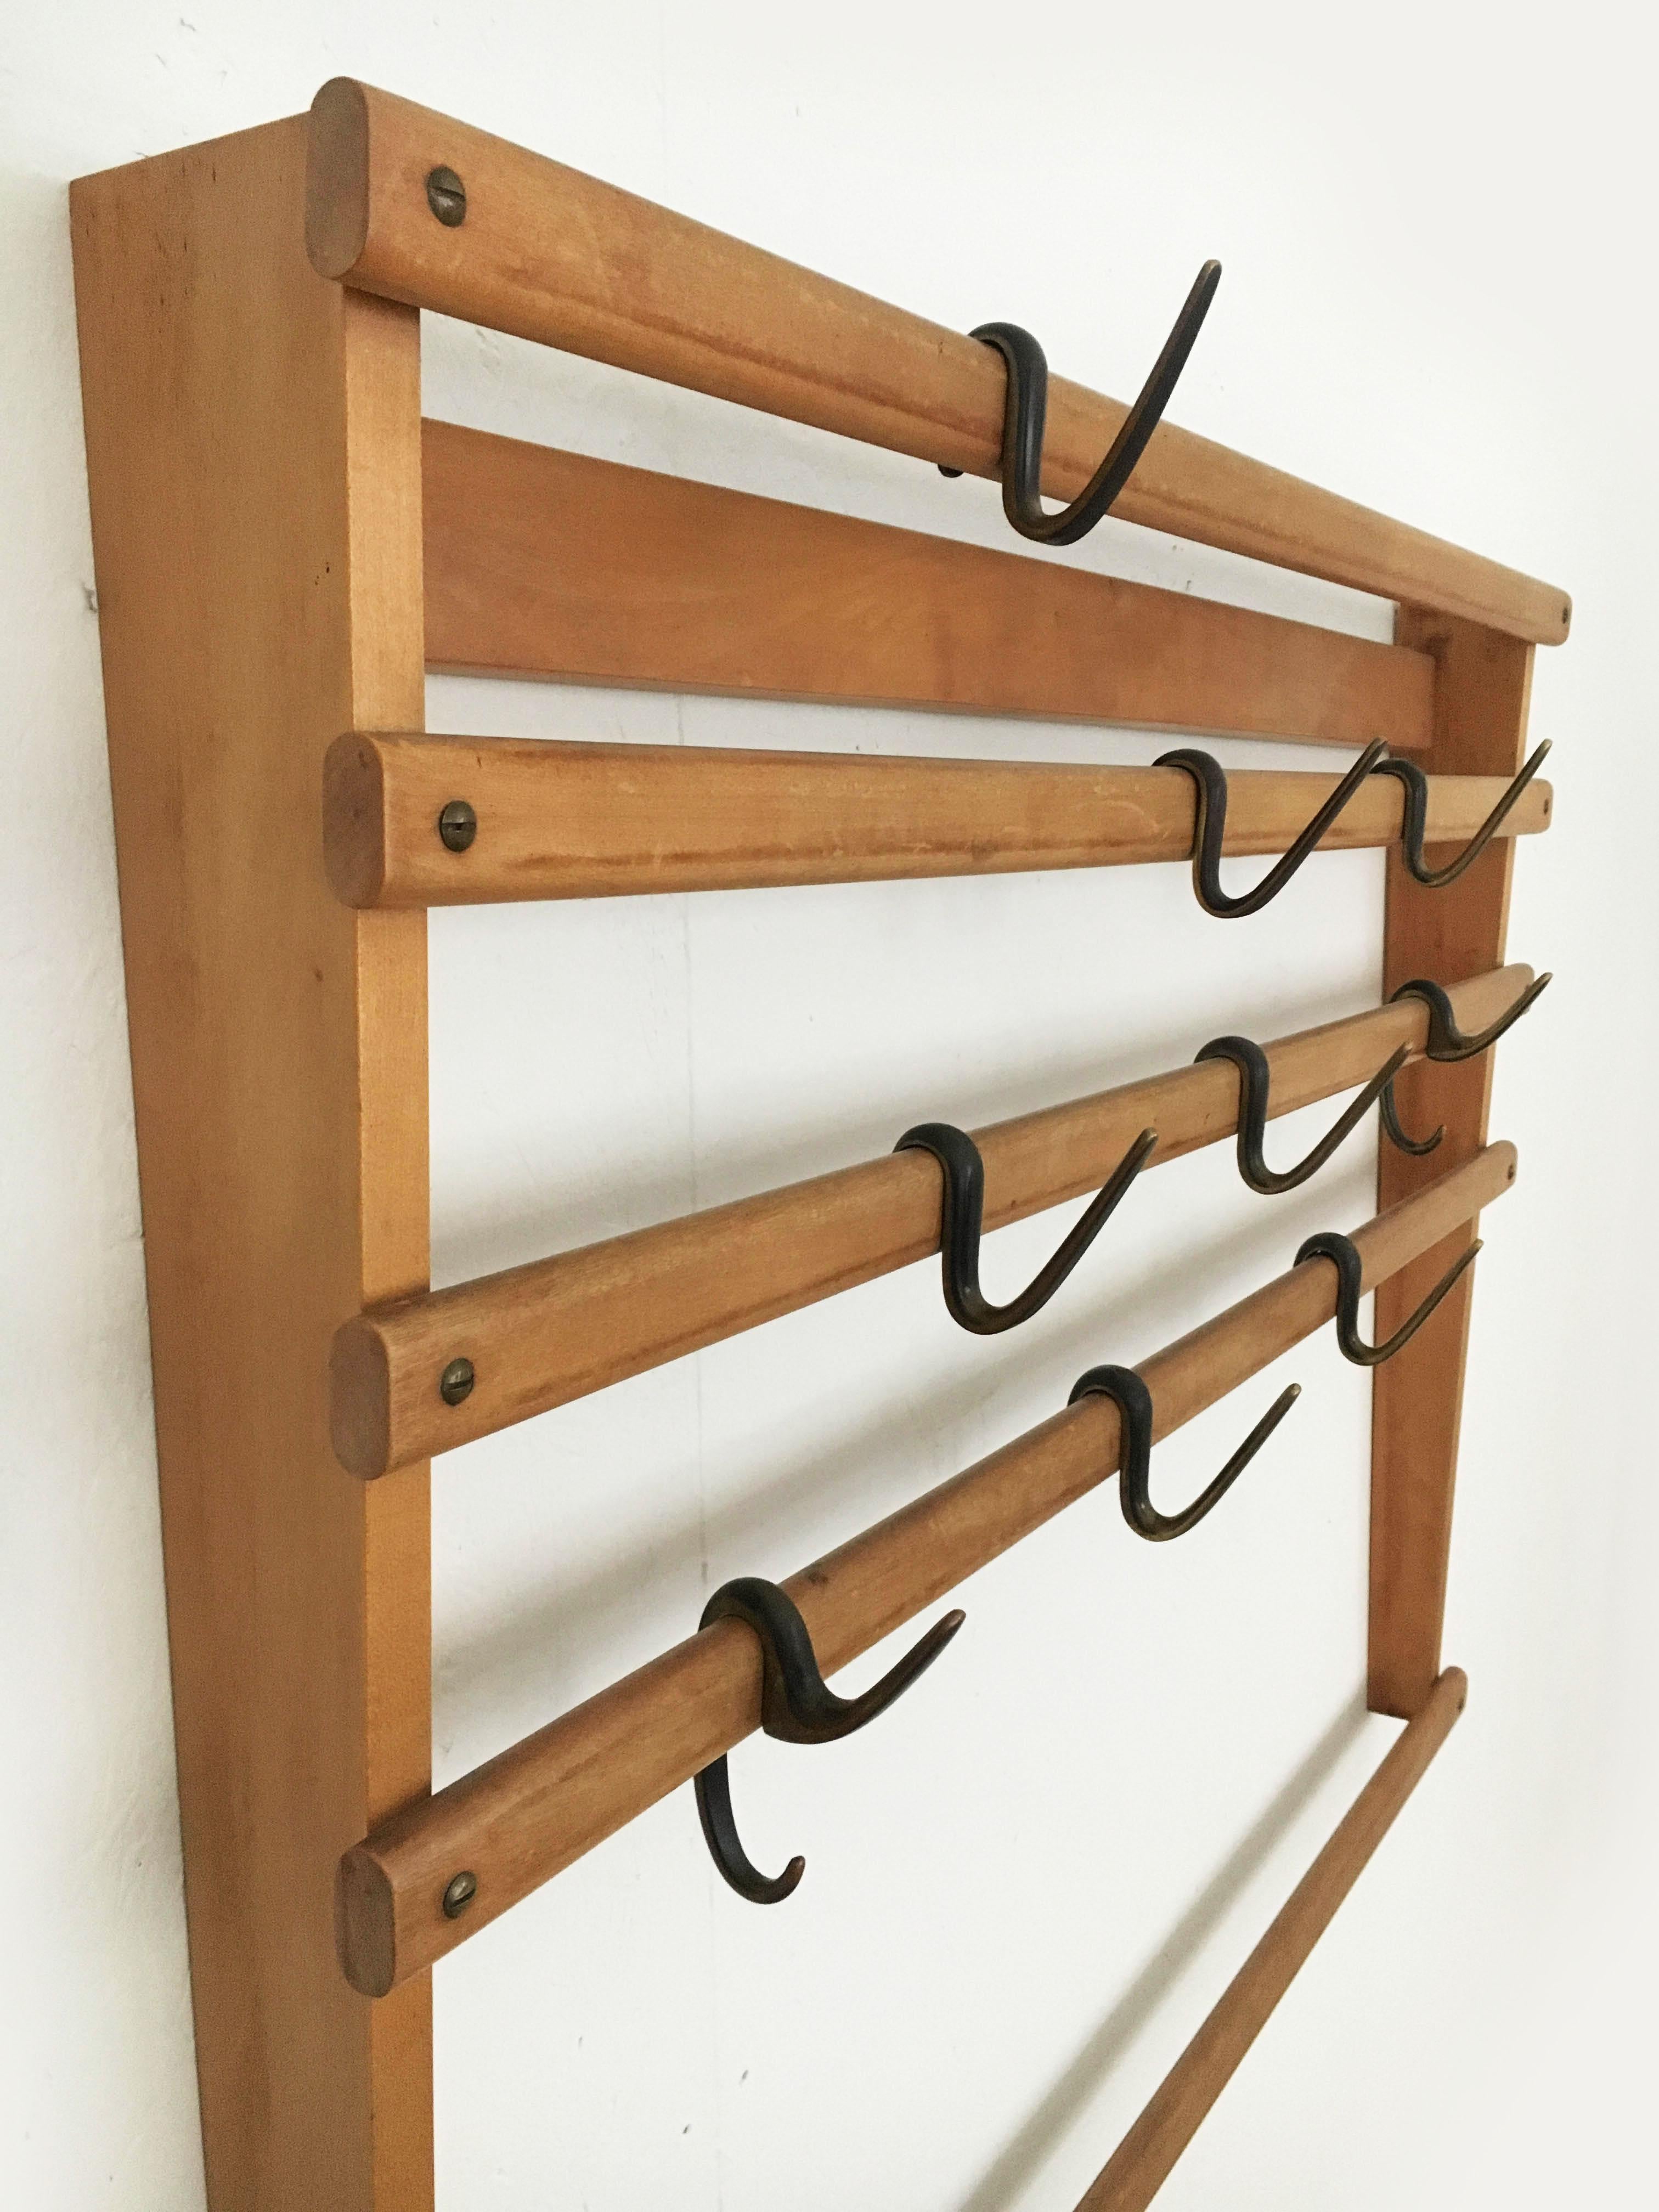 Beautiful rare wall-mounted coat rack wardrobe by Carl Auböck. The two 'G'- and seven 's'-shaped hooks are cast brass and finished combining two surface treatments. They are black patinated and polished on their sides. In excellent vintage condition